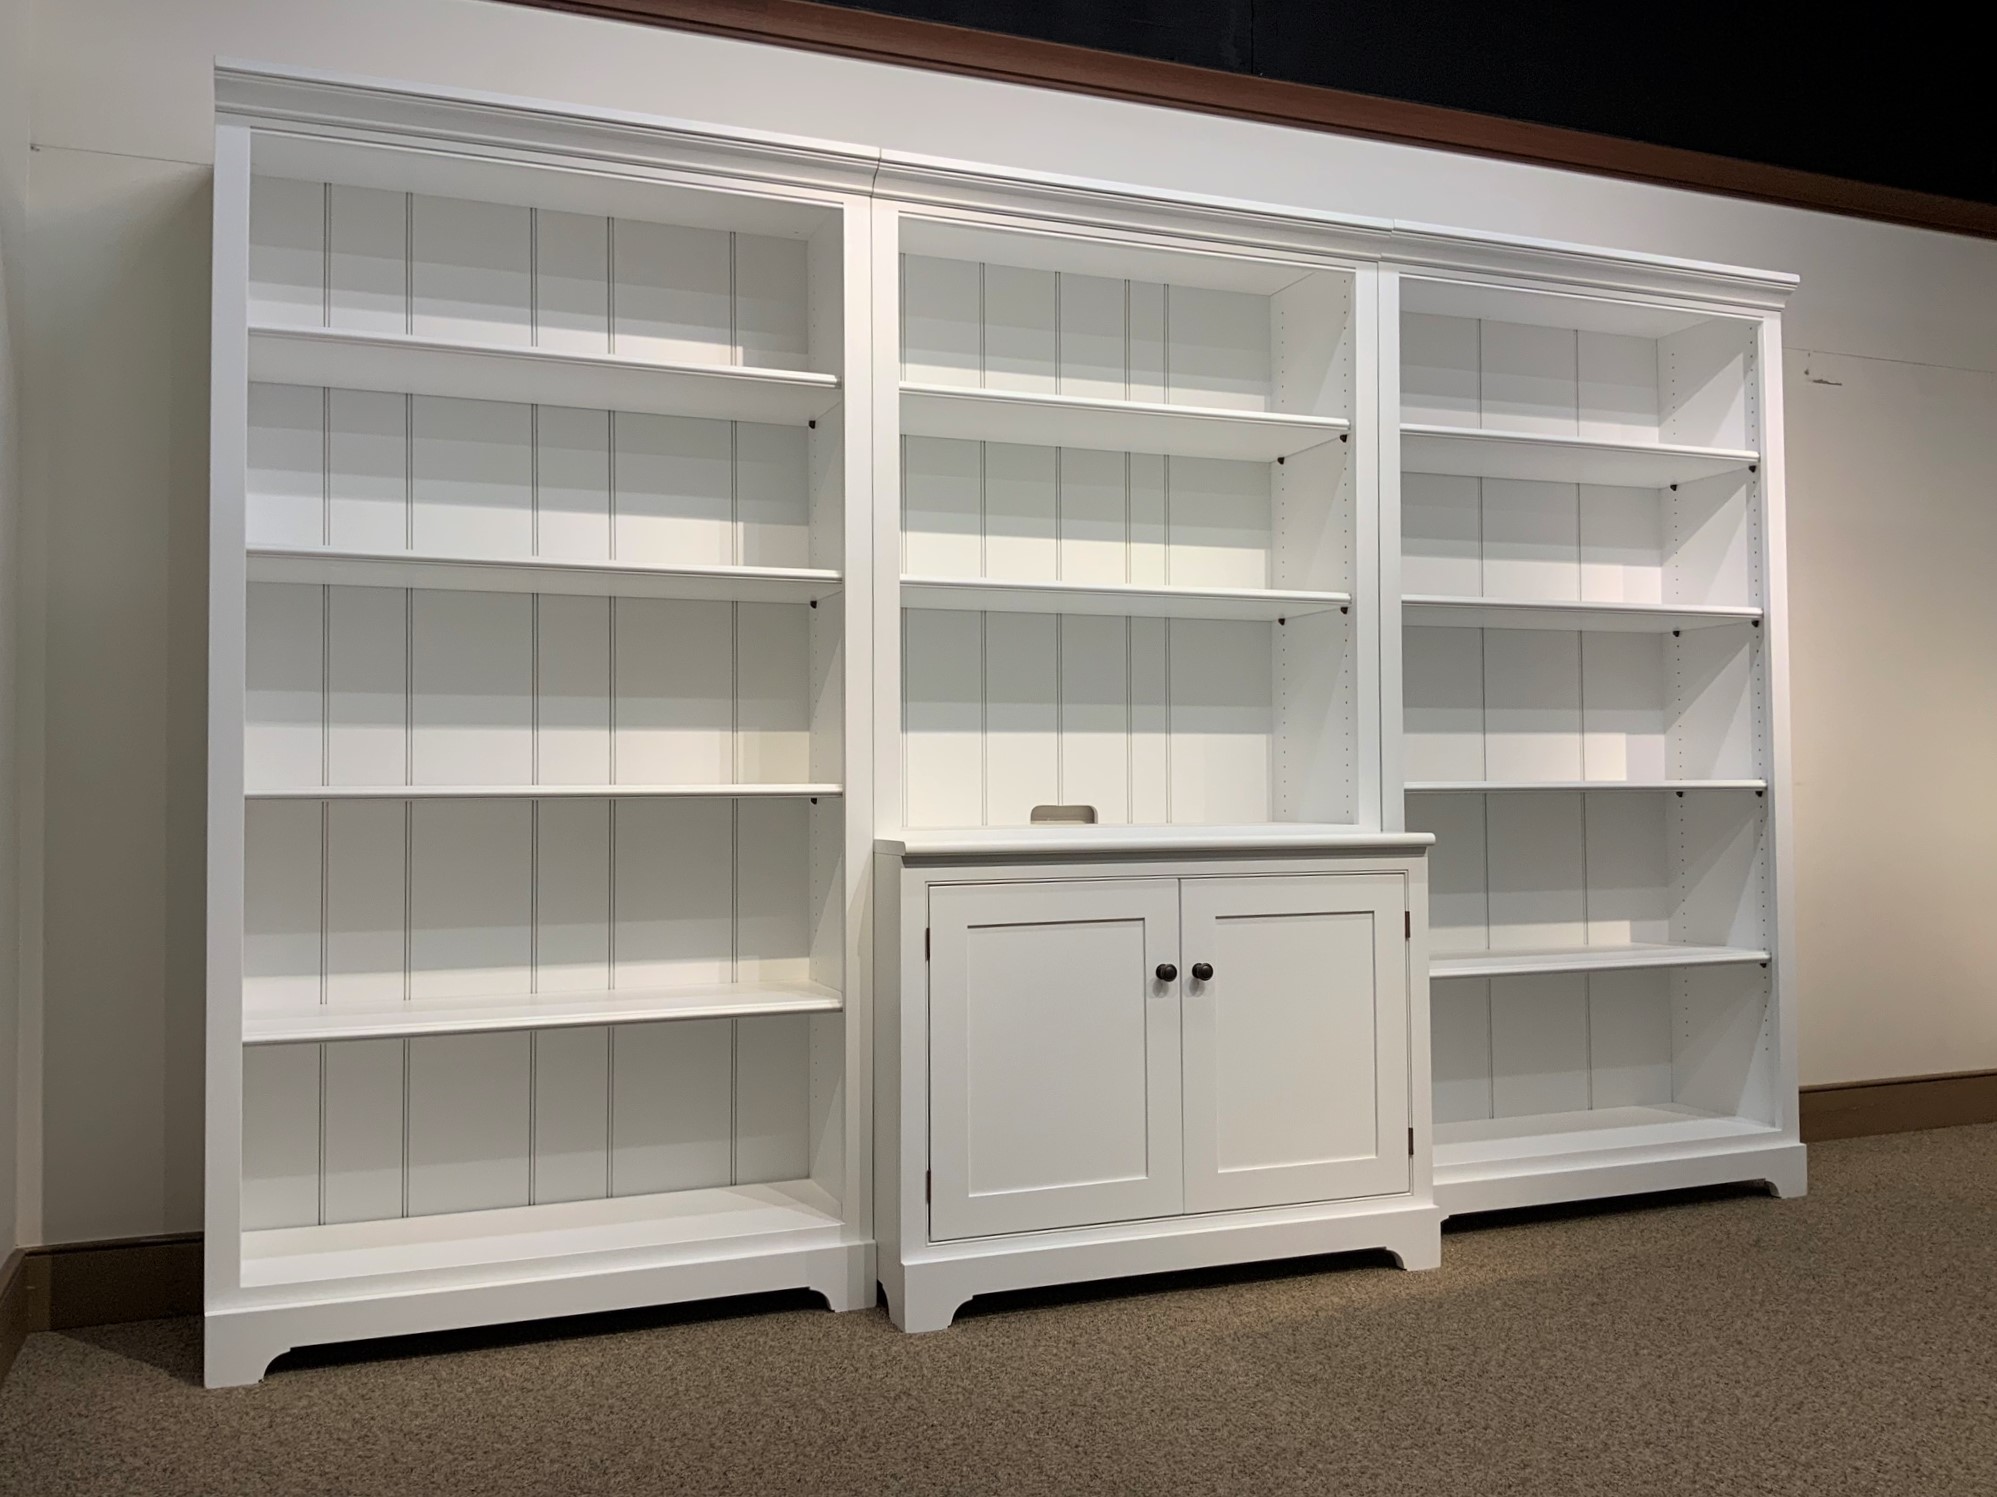 Shaker Bookcases Home Library, Tall Shelves With Doors